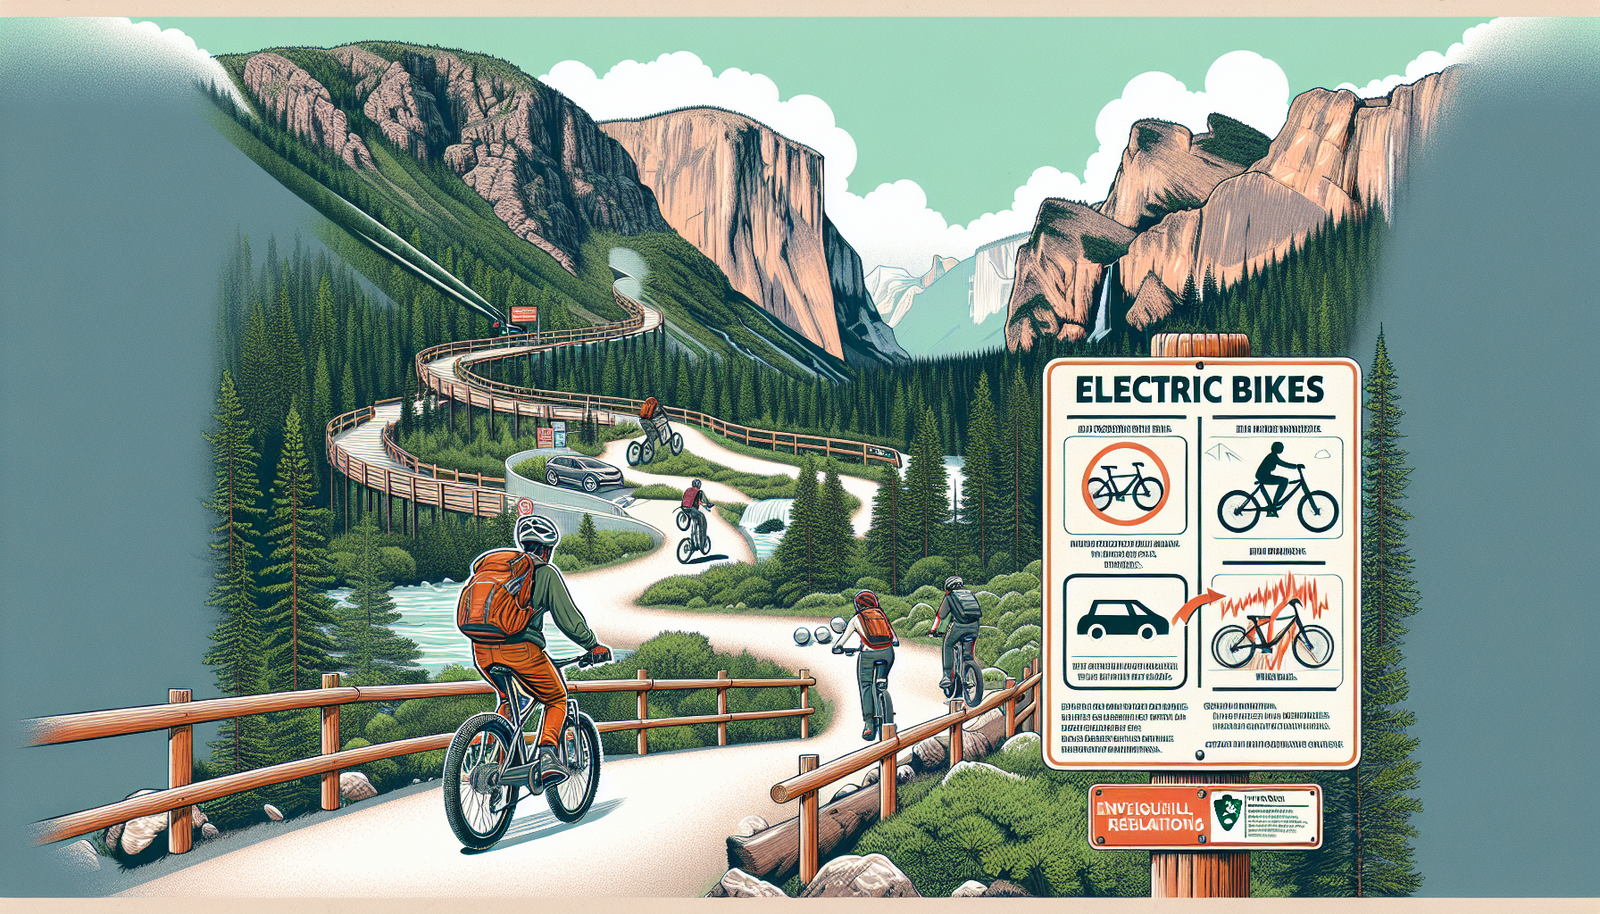 Can I Ride An Electric Bike On Bike Trails In National Parks?